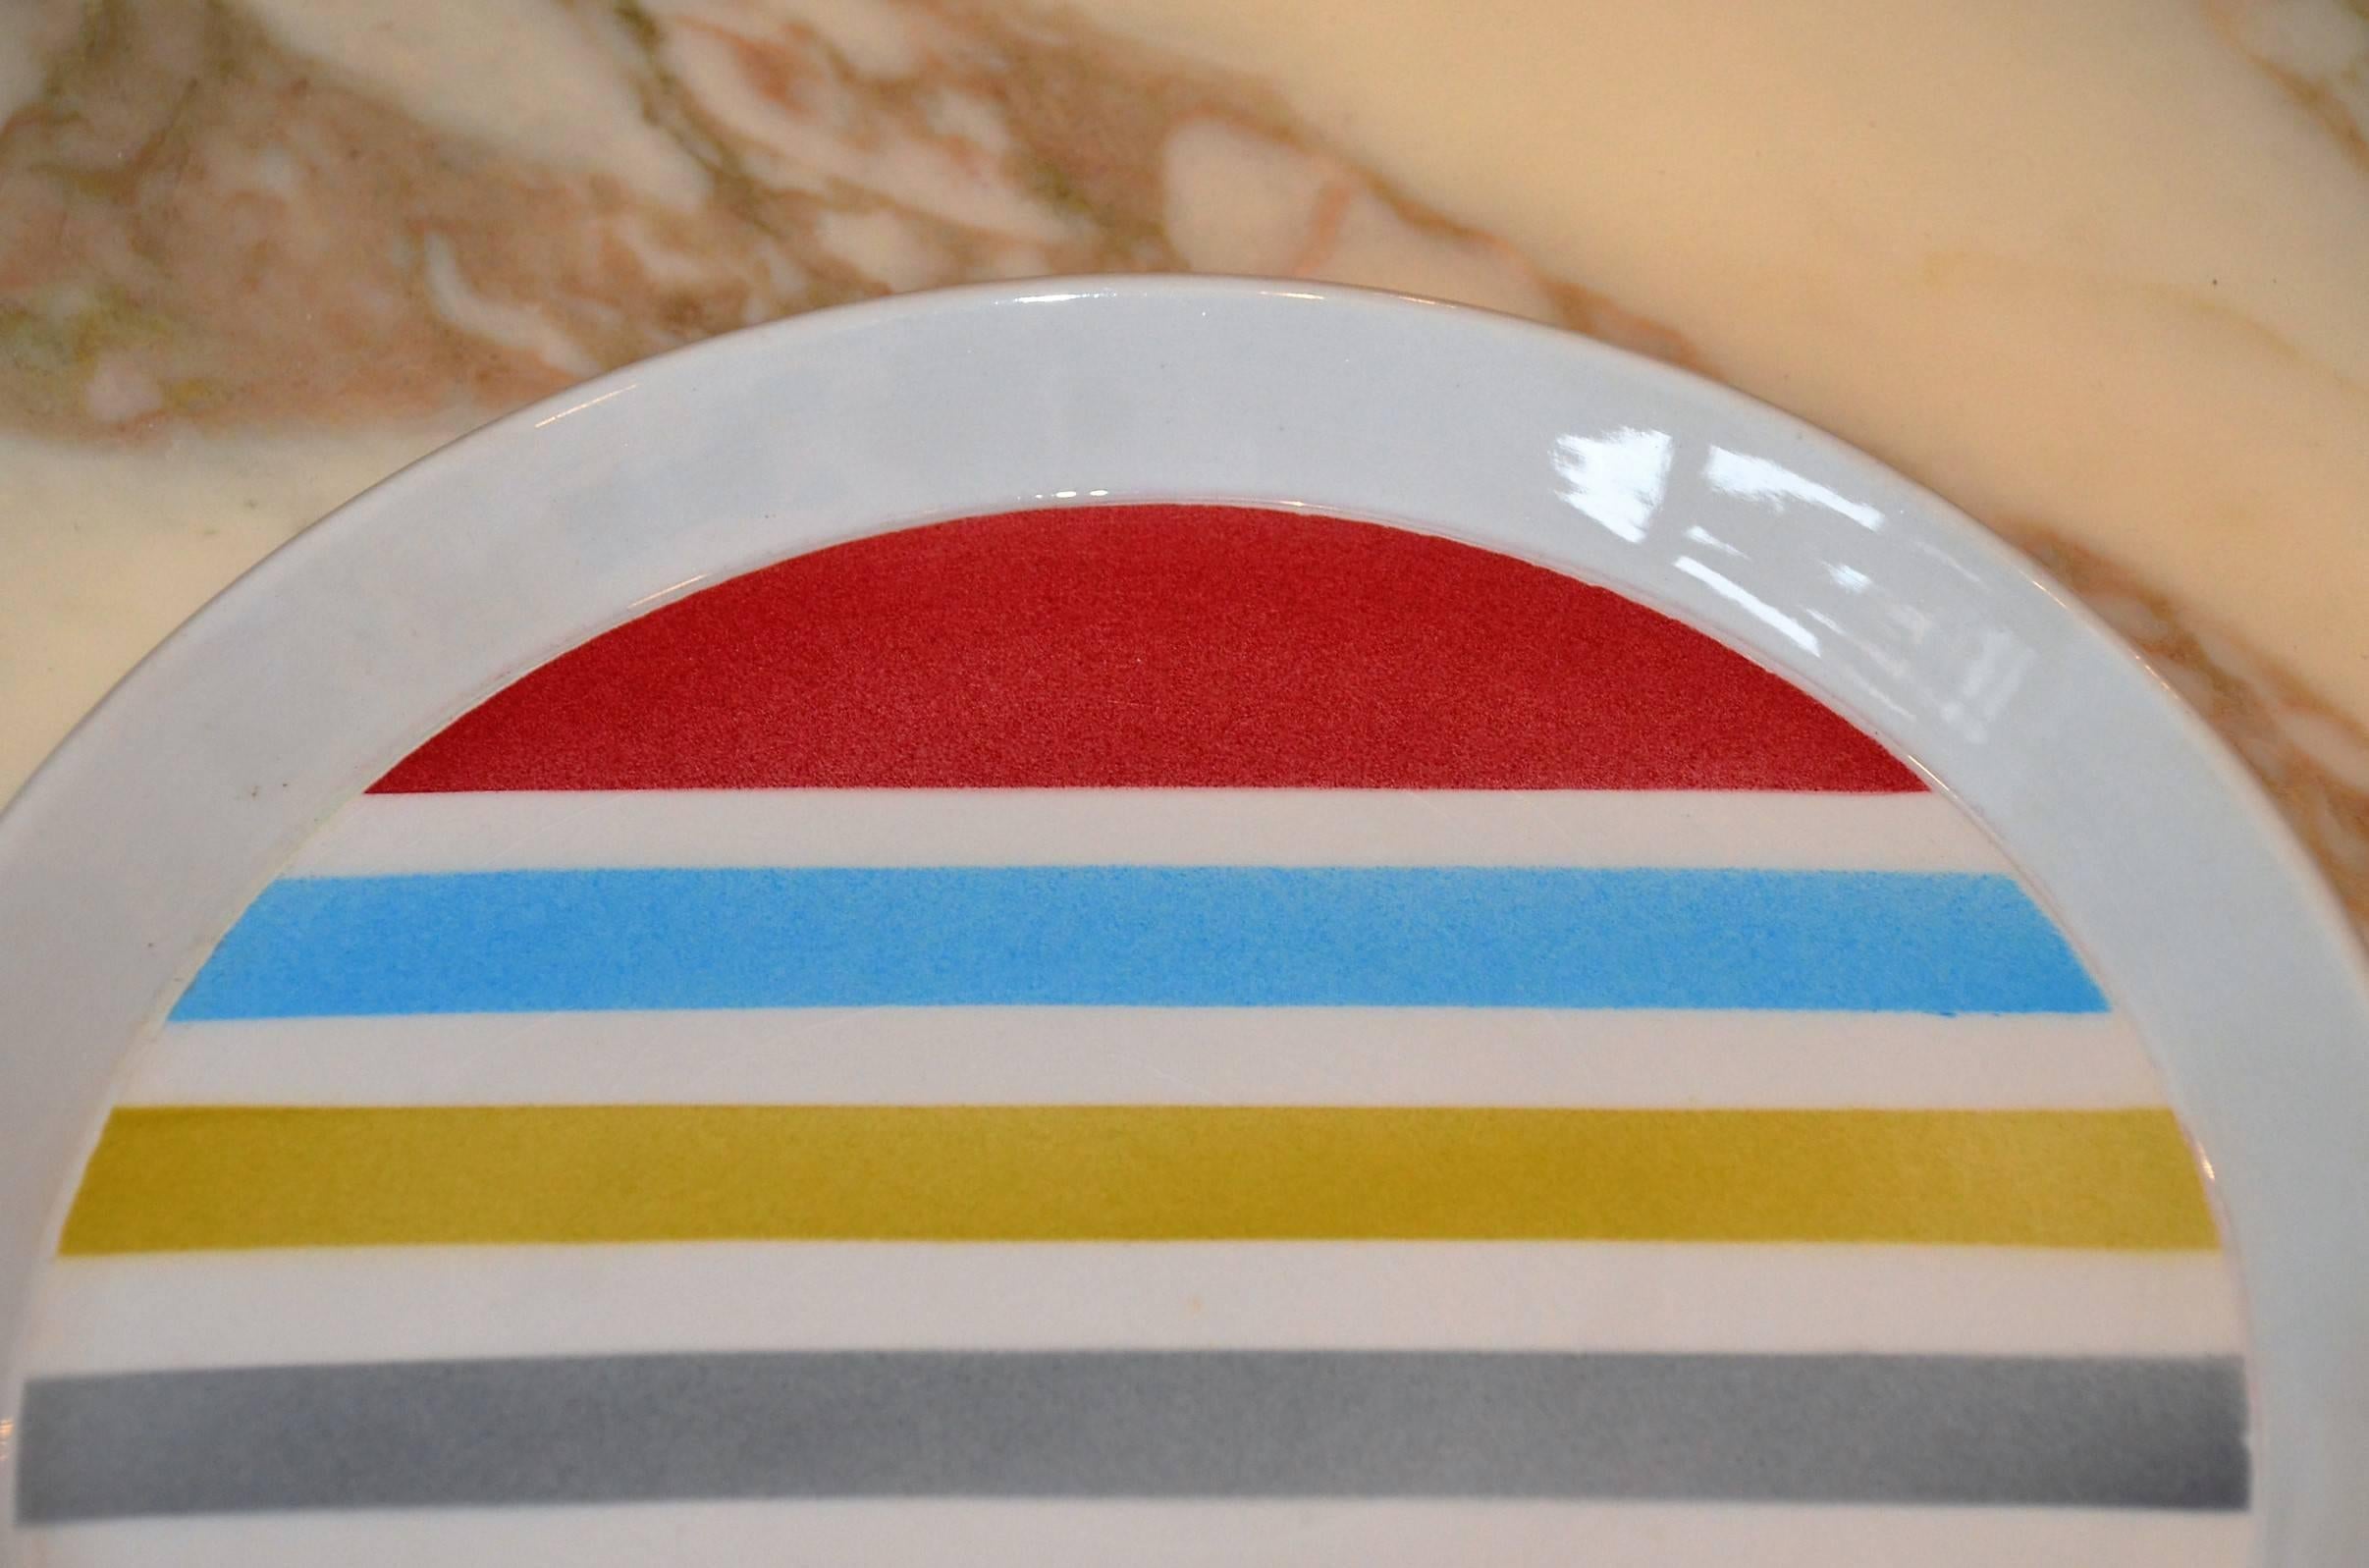 Modernist colorful plate, designed by Gio Ponti for Ceramica Franco Pozzi. The colors create a powerful and dramatic look of energy. It's in perfect conditions and marked on the back.

Free shipping.

Reference: 
Gio Ponti, Fulvio Irace, Page